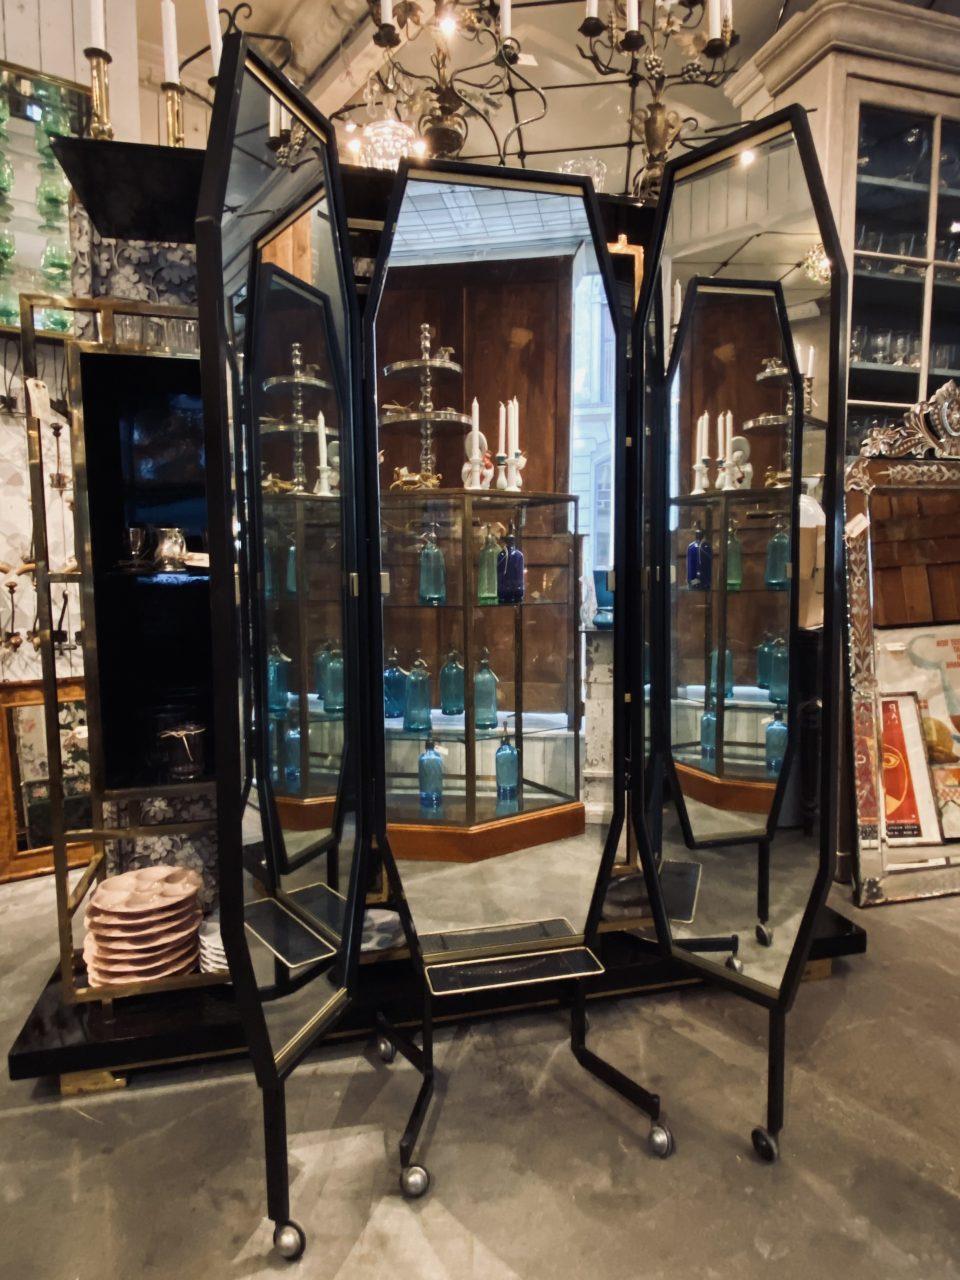 Gorgeous retro Italian 3-panelled dressing mirror, circa 1950s-1960s. Each 3 octagon shaped mirror frames are black painted metal and with decorative brass moldings, as well as a shelf in perforated metal.

The mirrored glass is original, and the